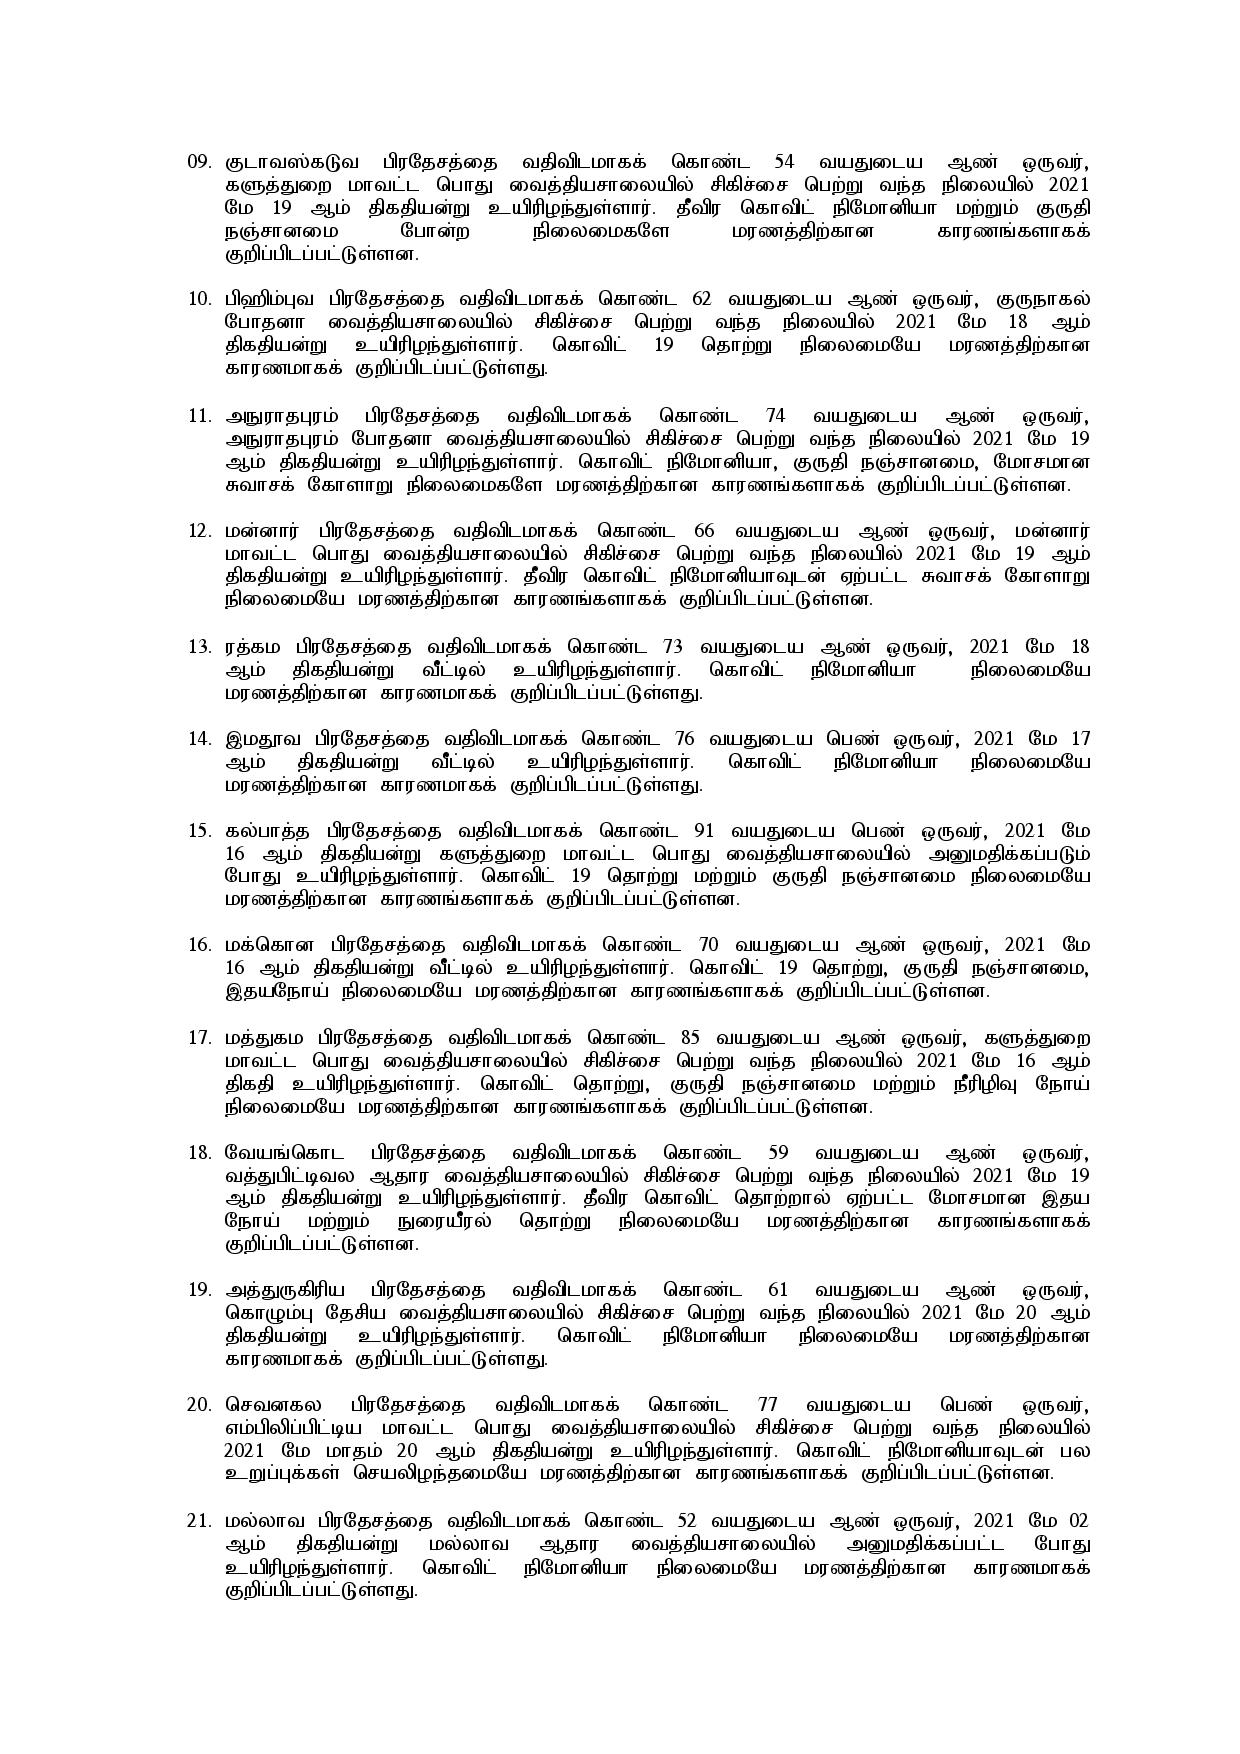 Press Release 494 Tamil page 002